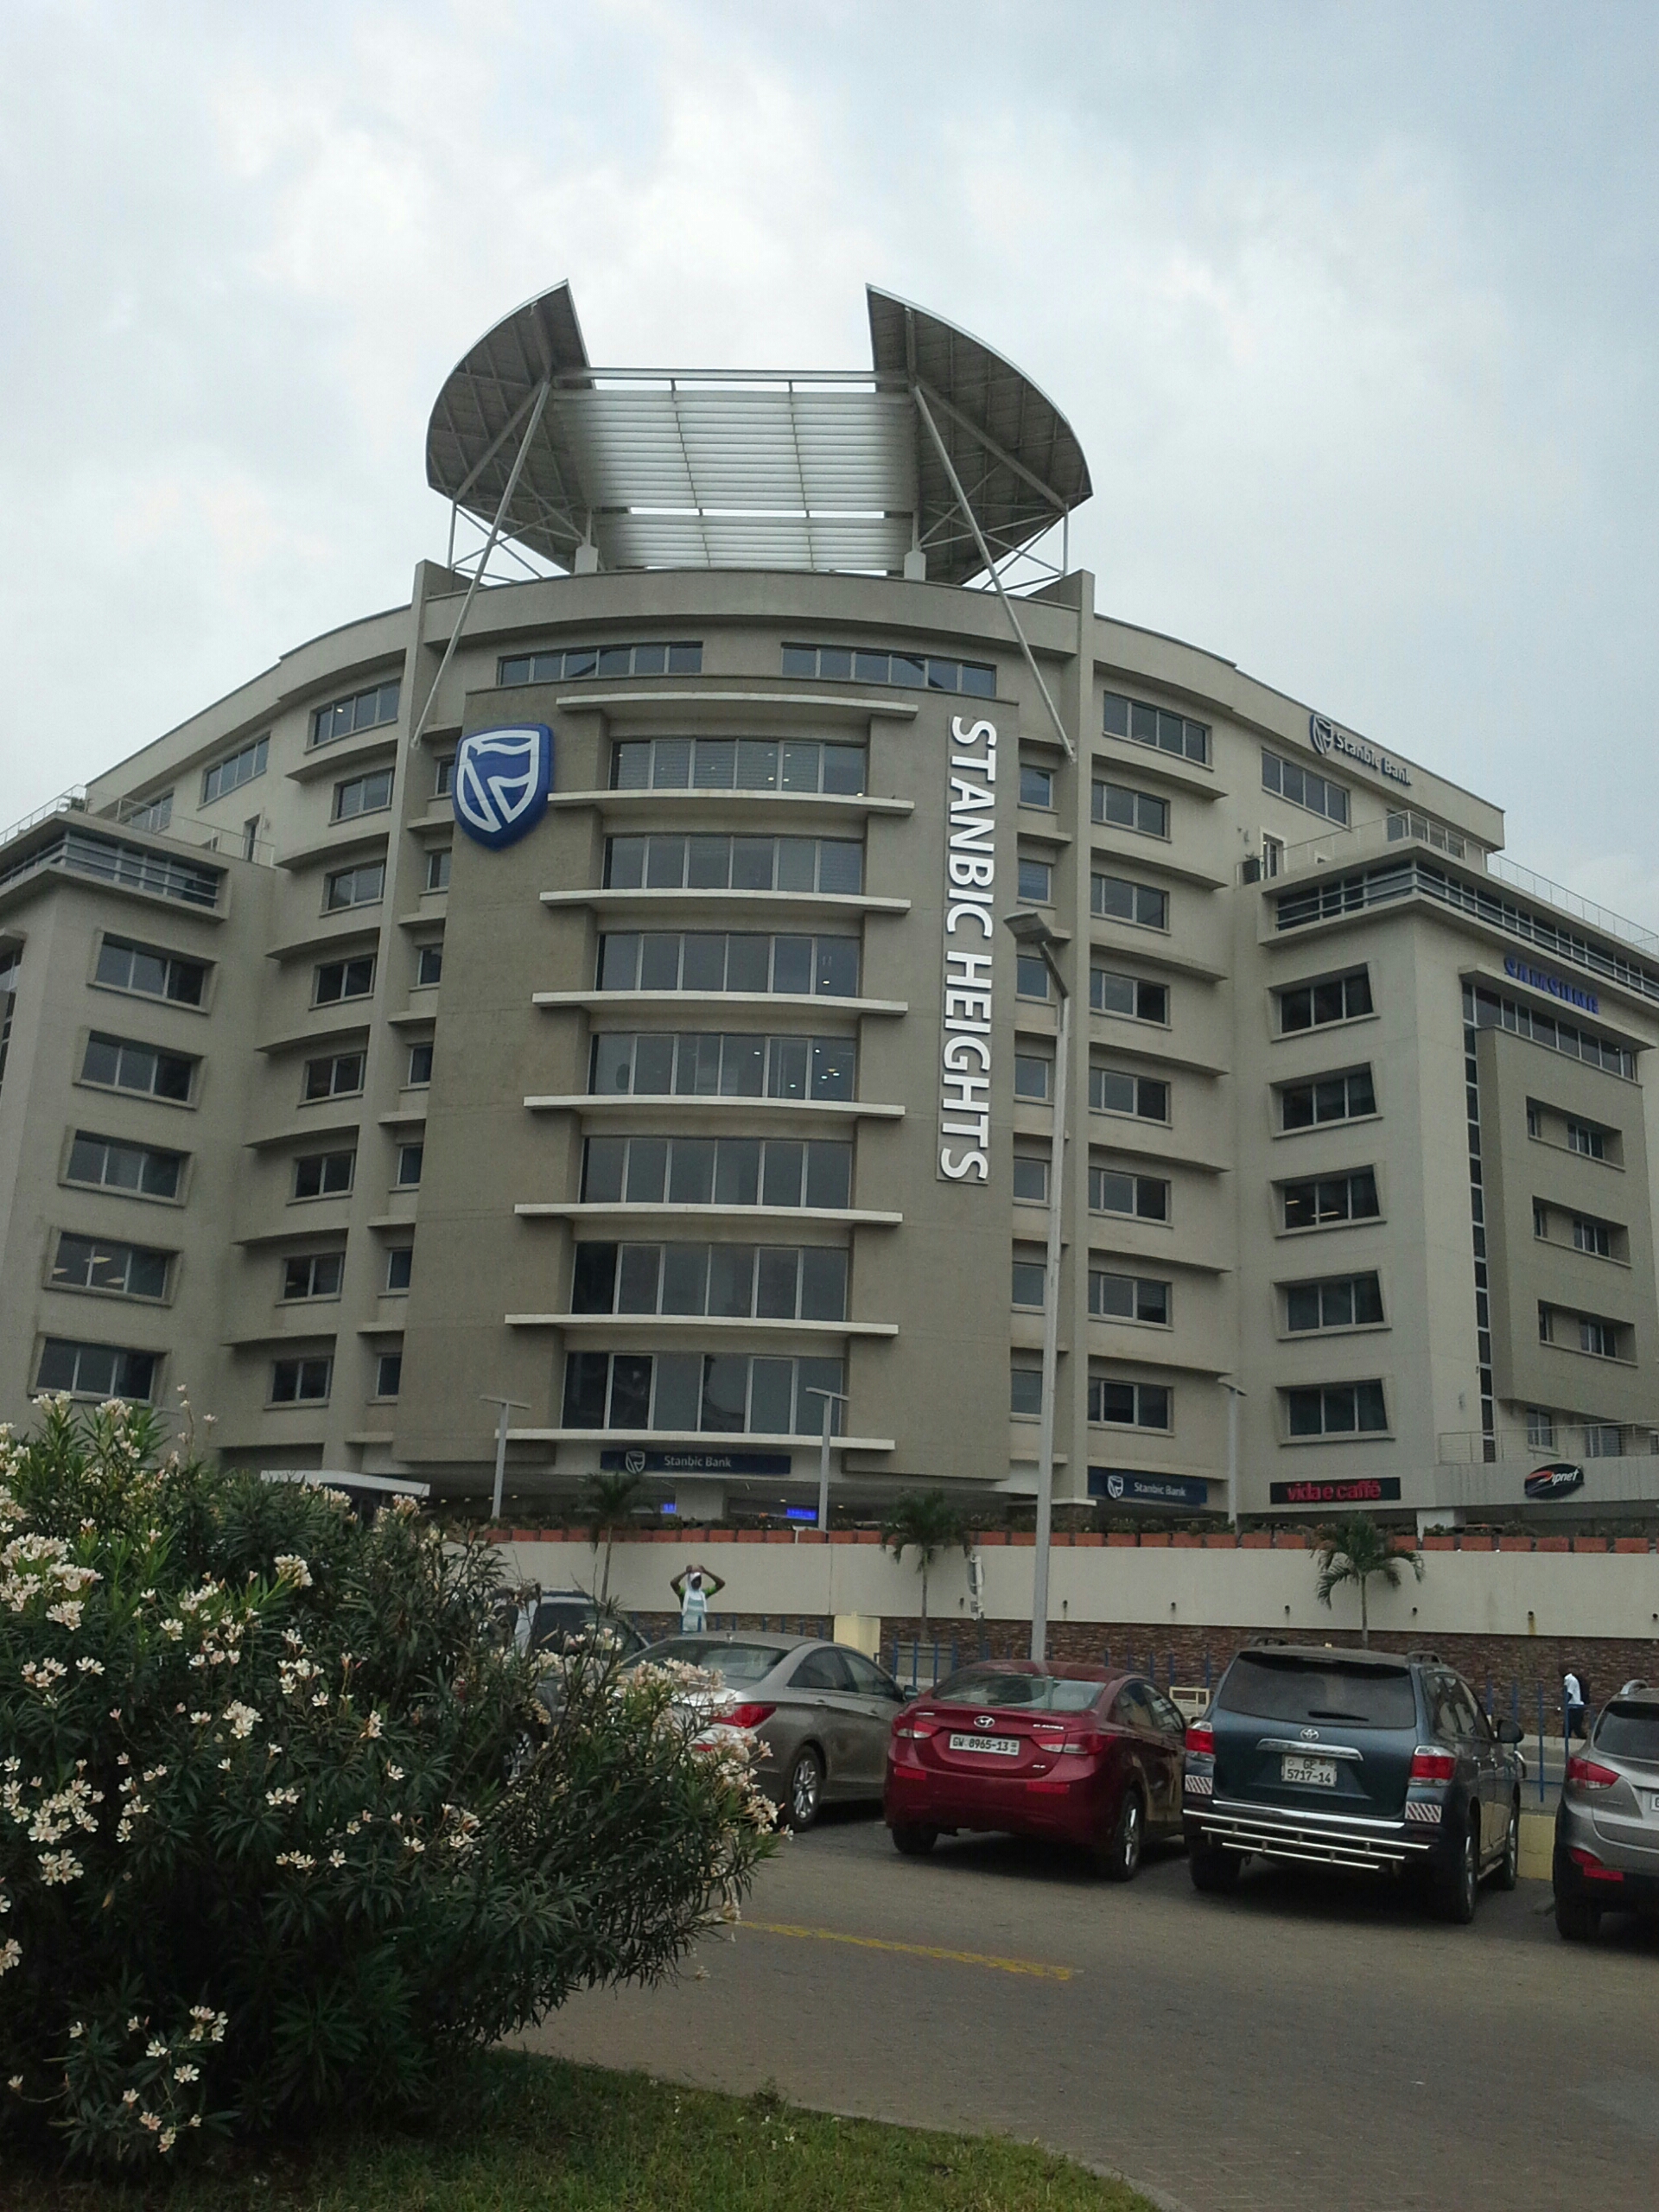 Stanbic Heights:  Operations Manager Inspection 